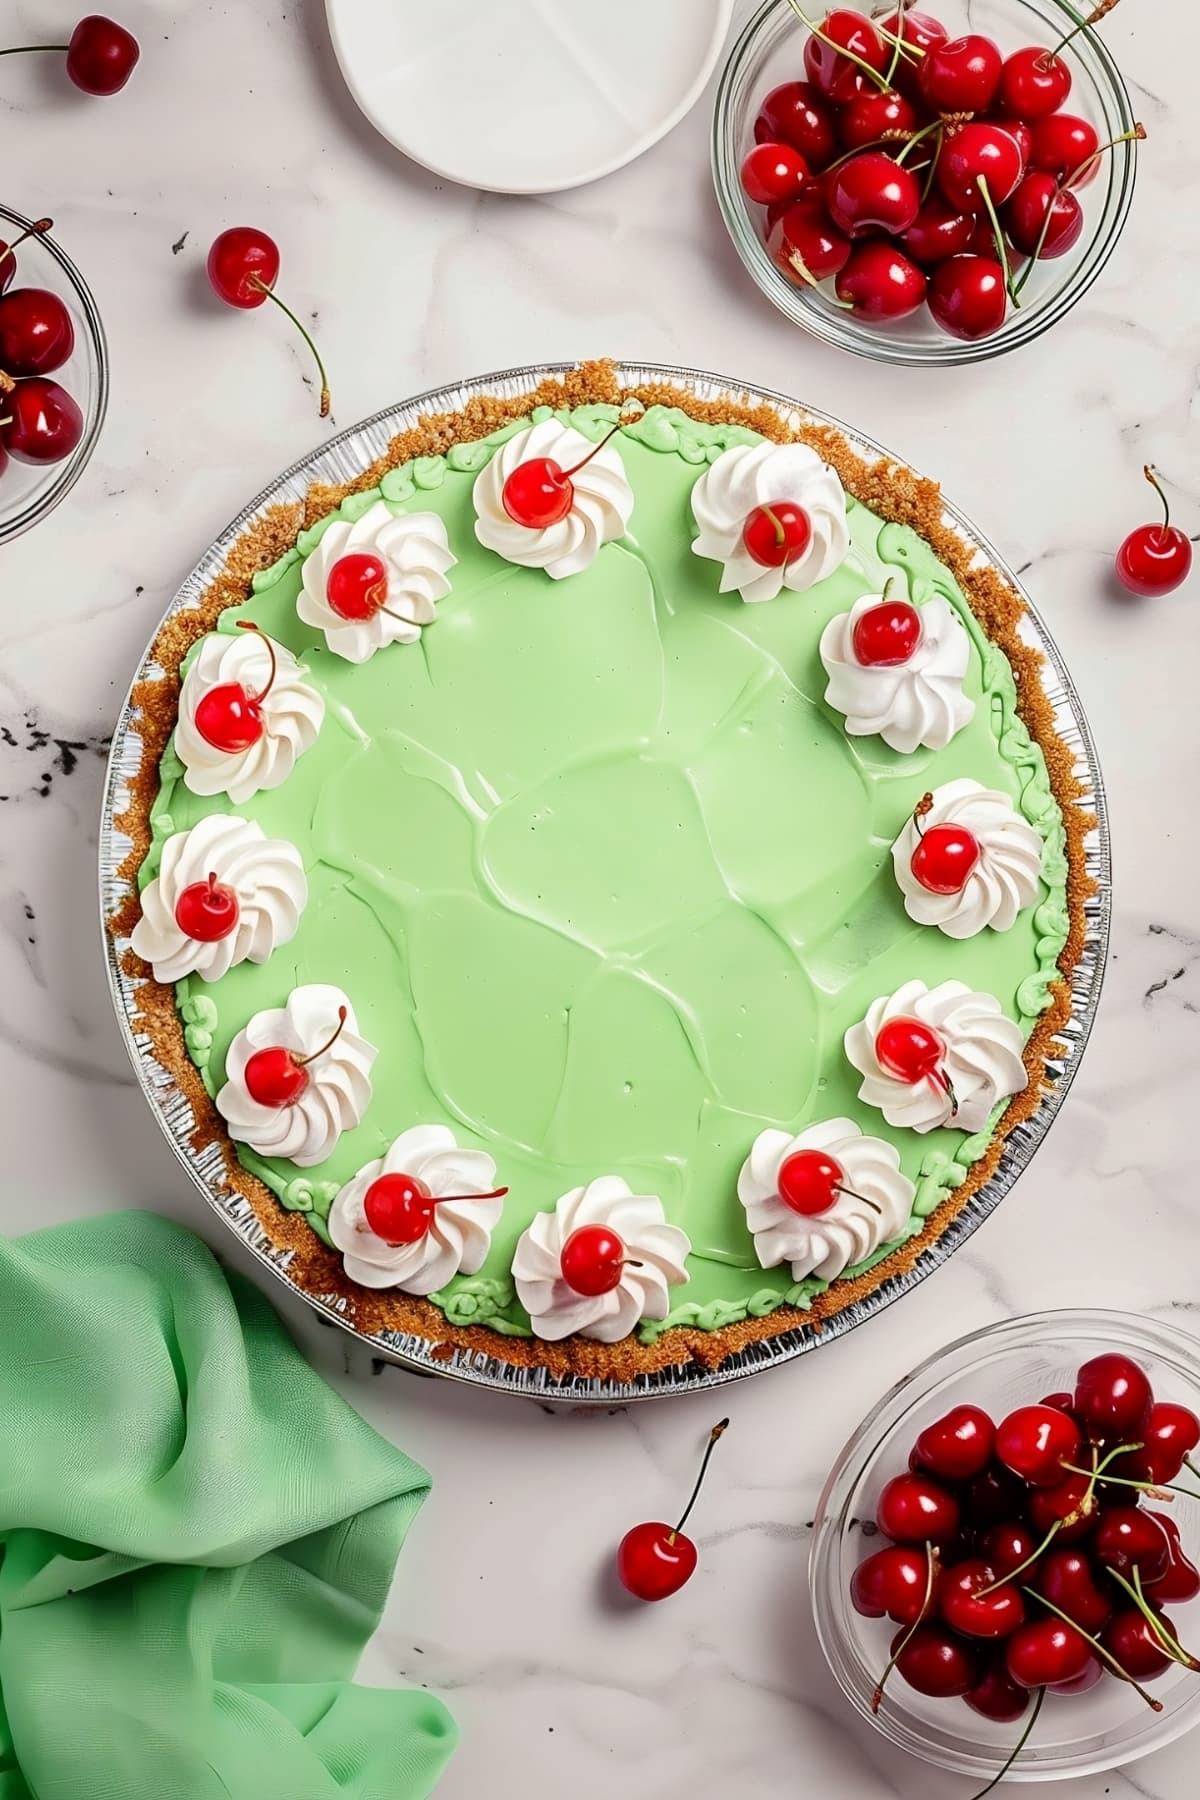 Top down view of Shamrock Shake pie with whipped cream and cherries for garnish